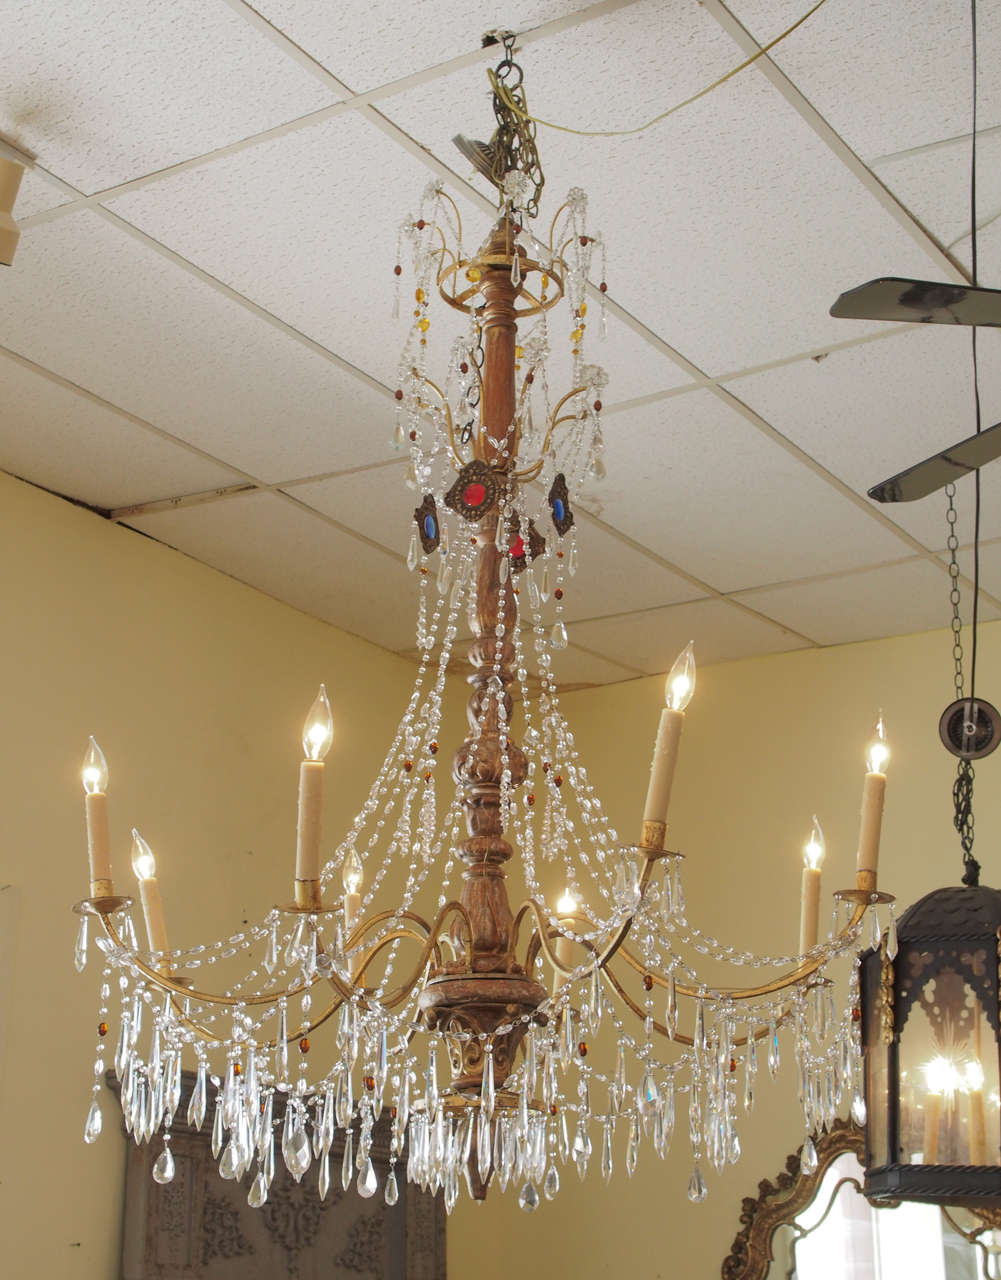 A spectacular, elegantly decorated late 19th century Genovese chandelier having a carved giltwood central shaft. The upper finial is surrounded by a gilt finish metal ring from which emanate eight arched gilt finish metal spokes adorned with crystal